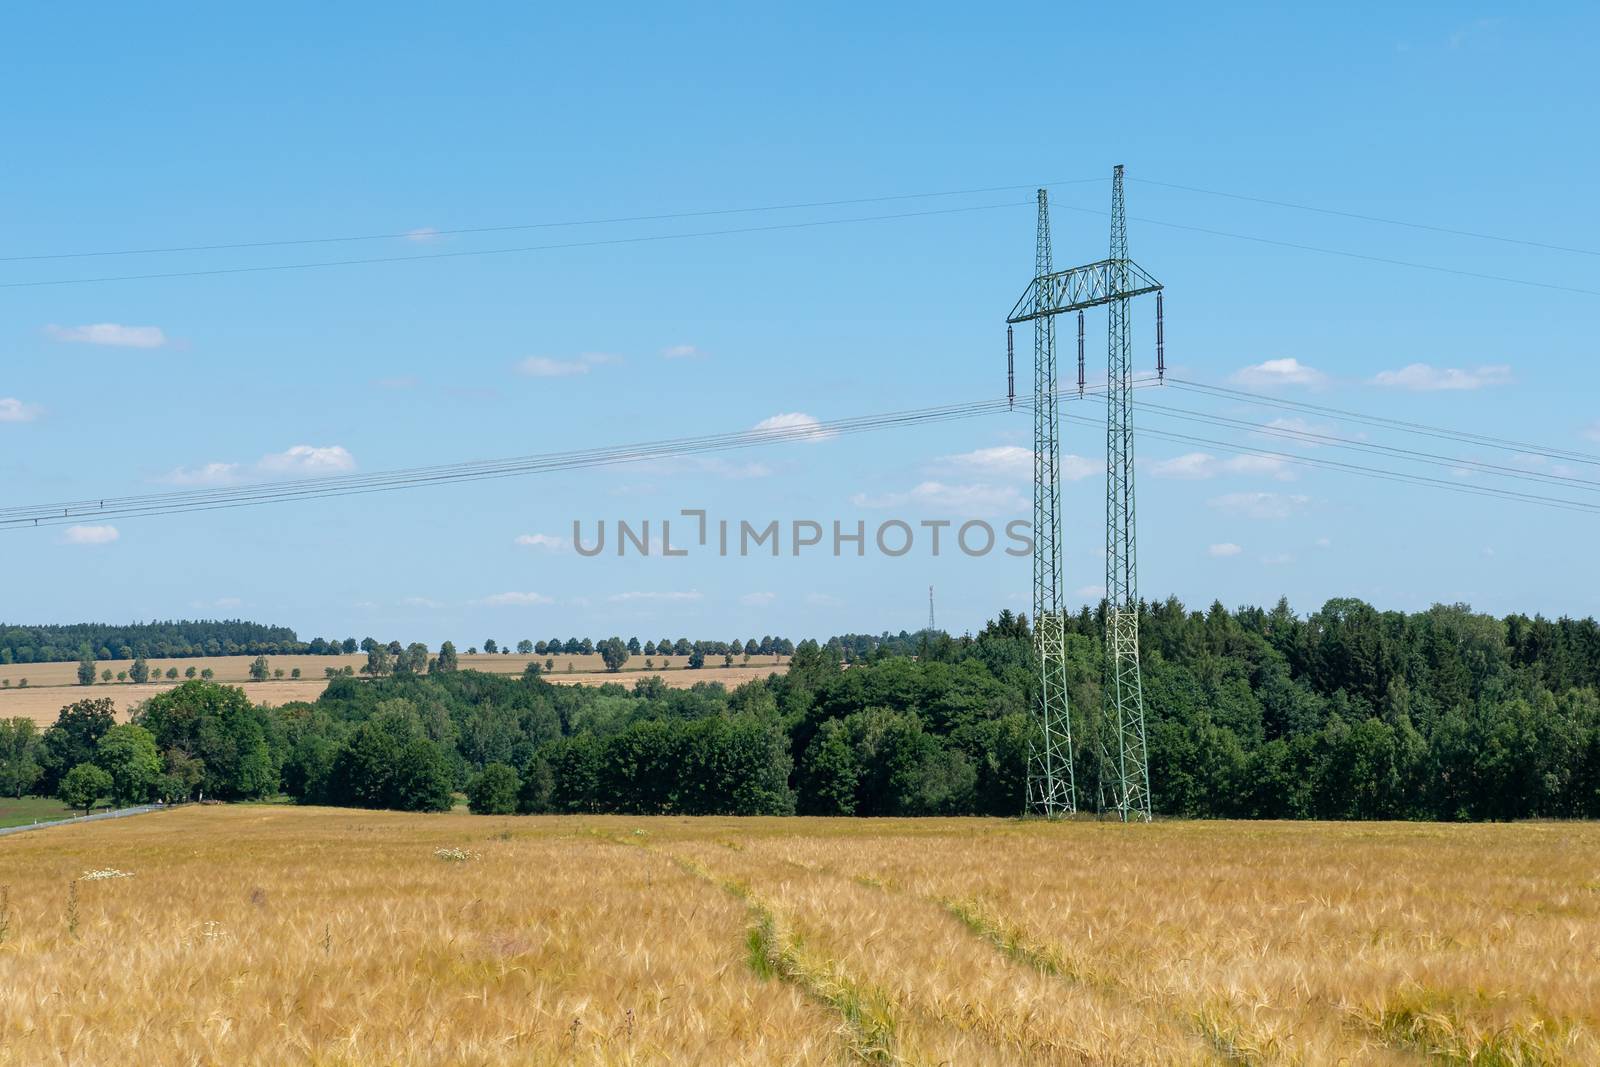 High voltage power lines above wheat field.